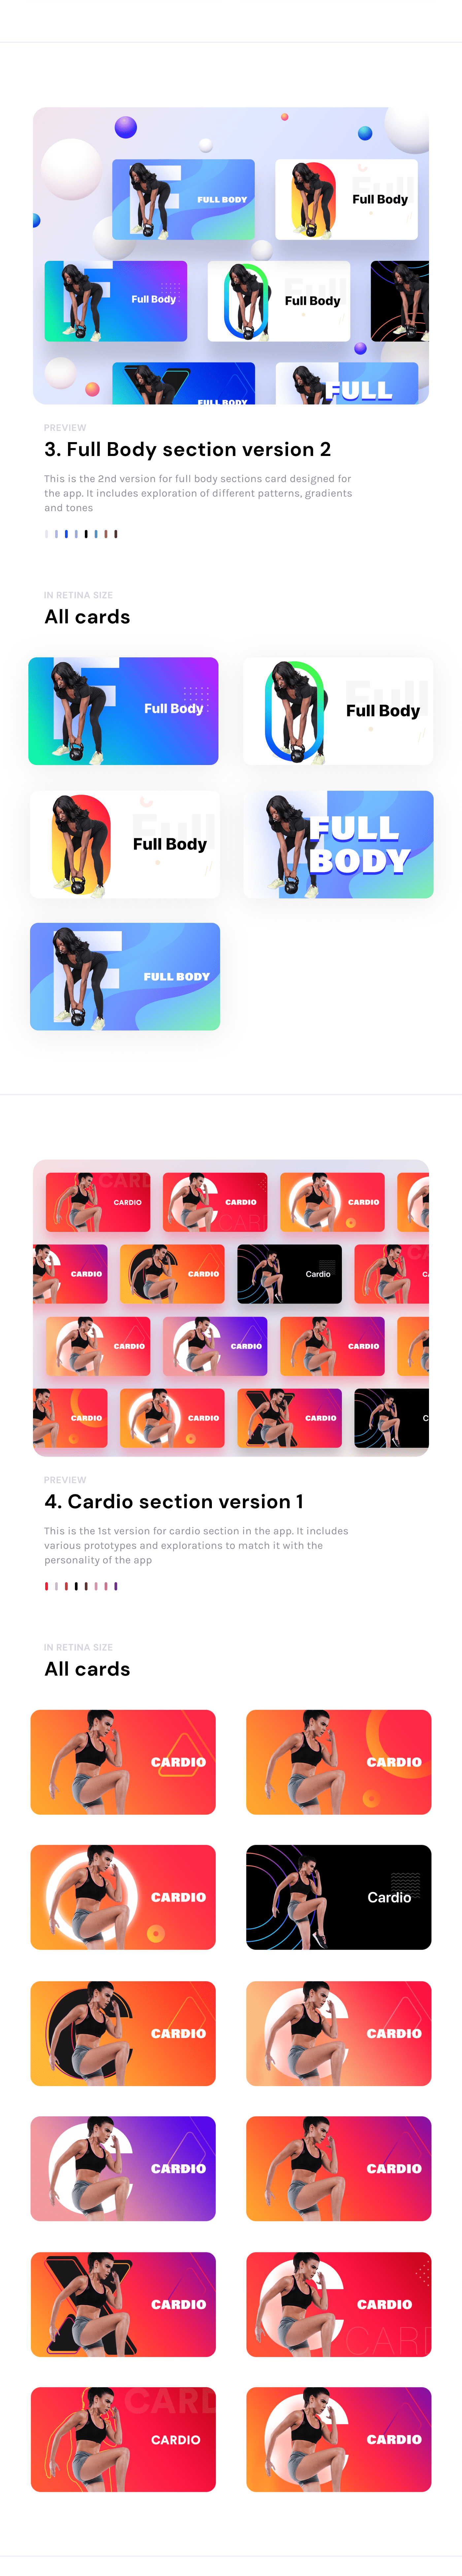 fitness product prakhar neel sharma ui ux Project Design cards banners cardio body legs gym app design application interface icons illustrations